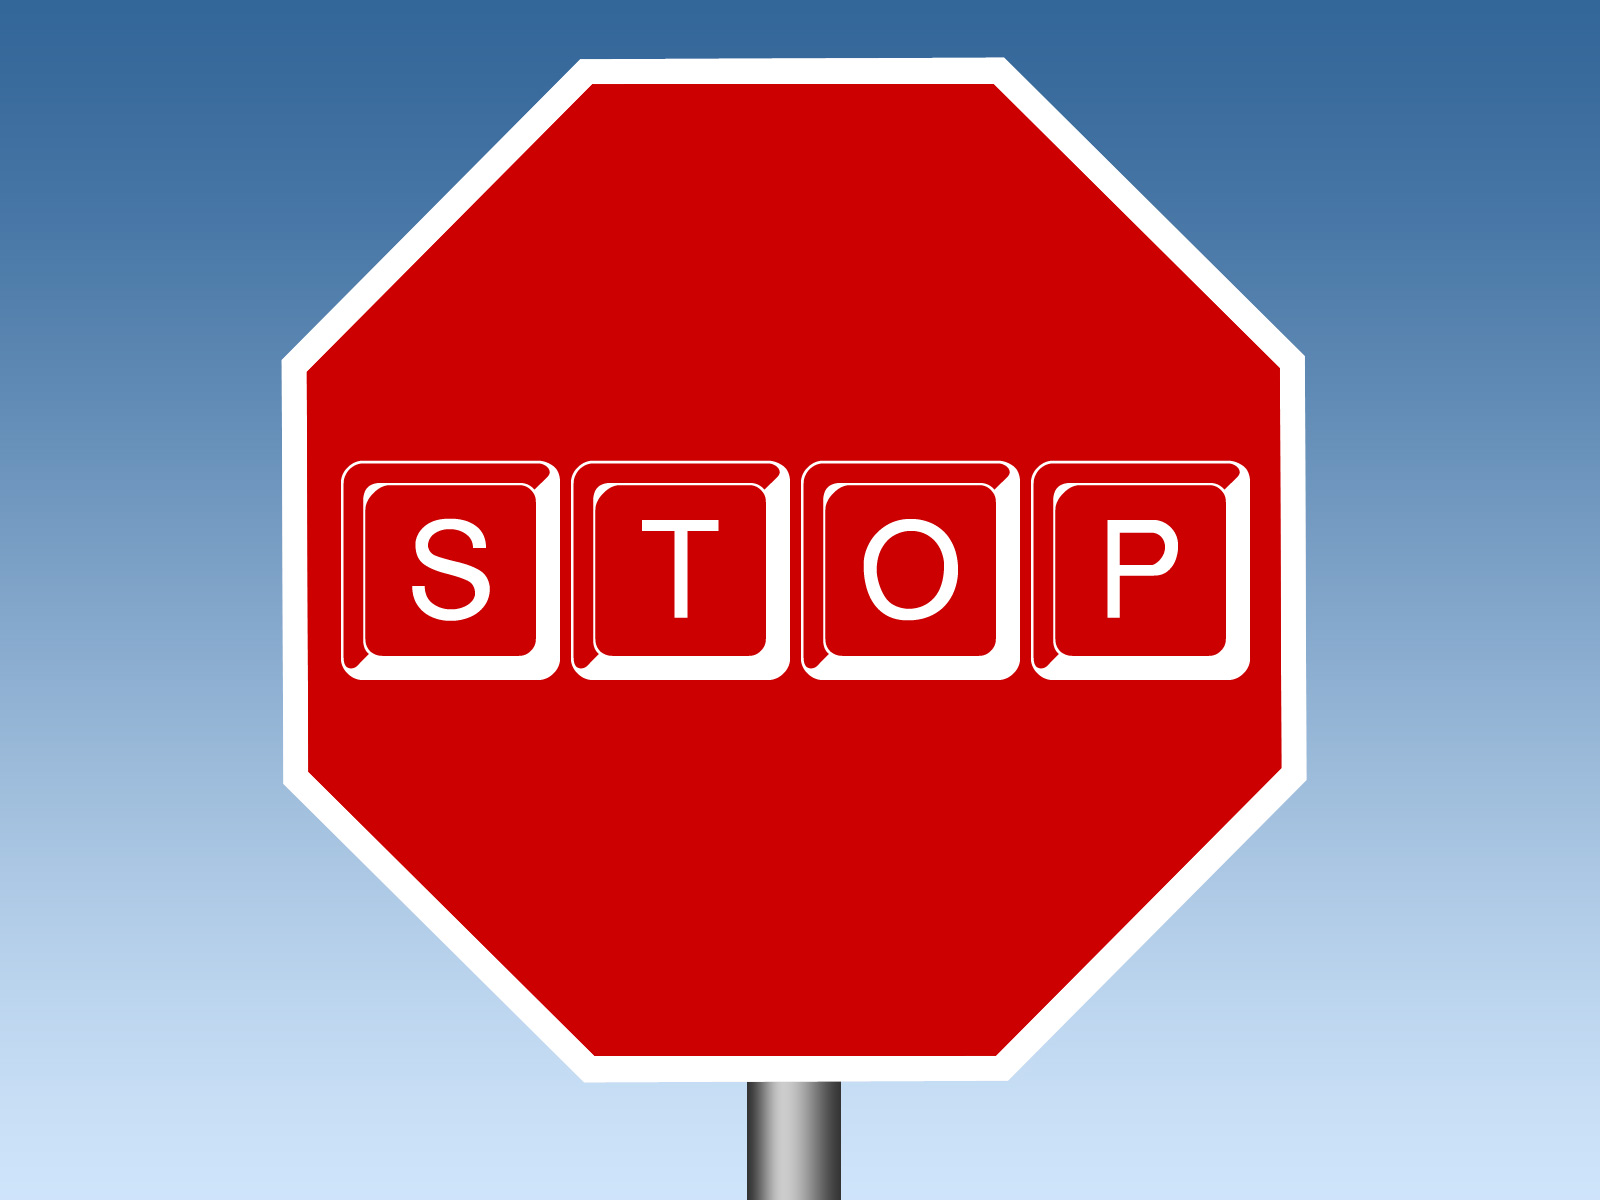 Red stop sign with letter keys